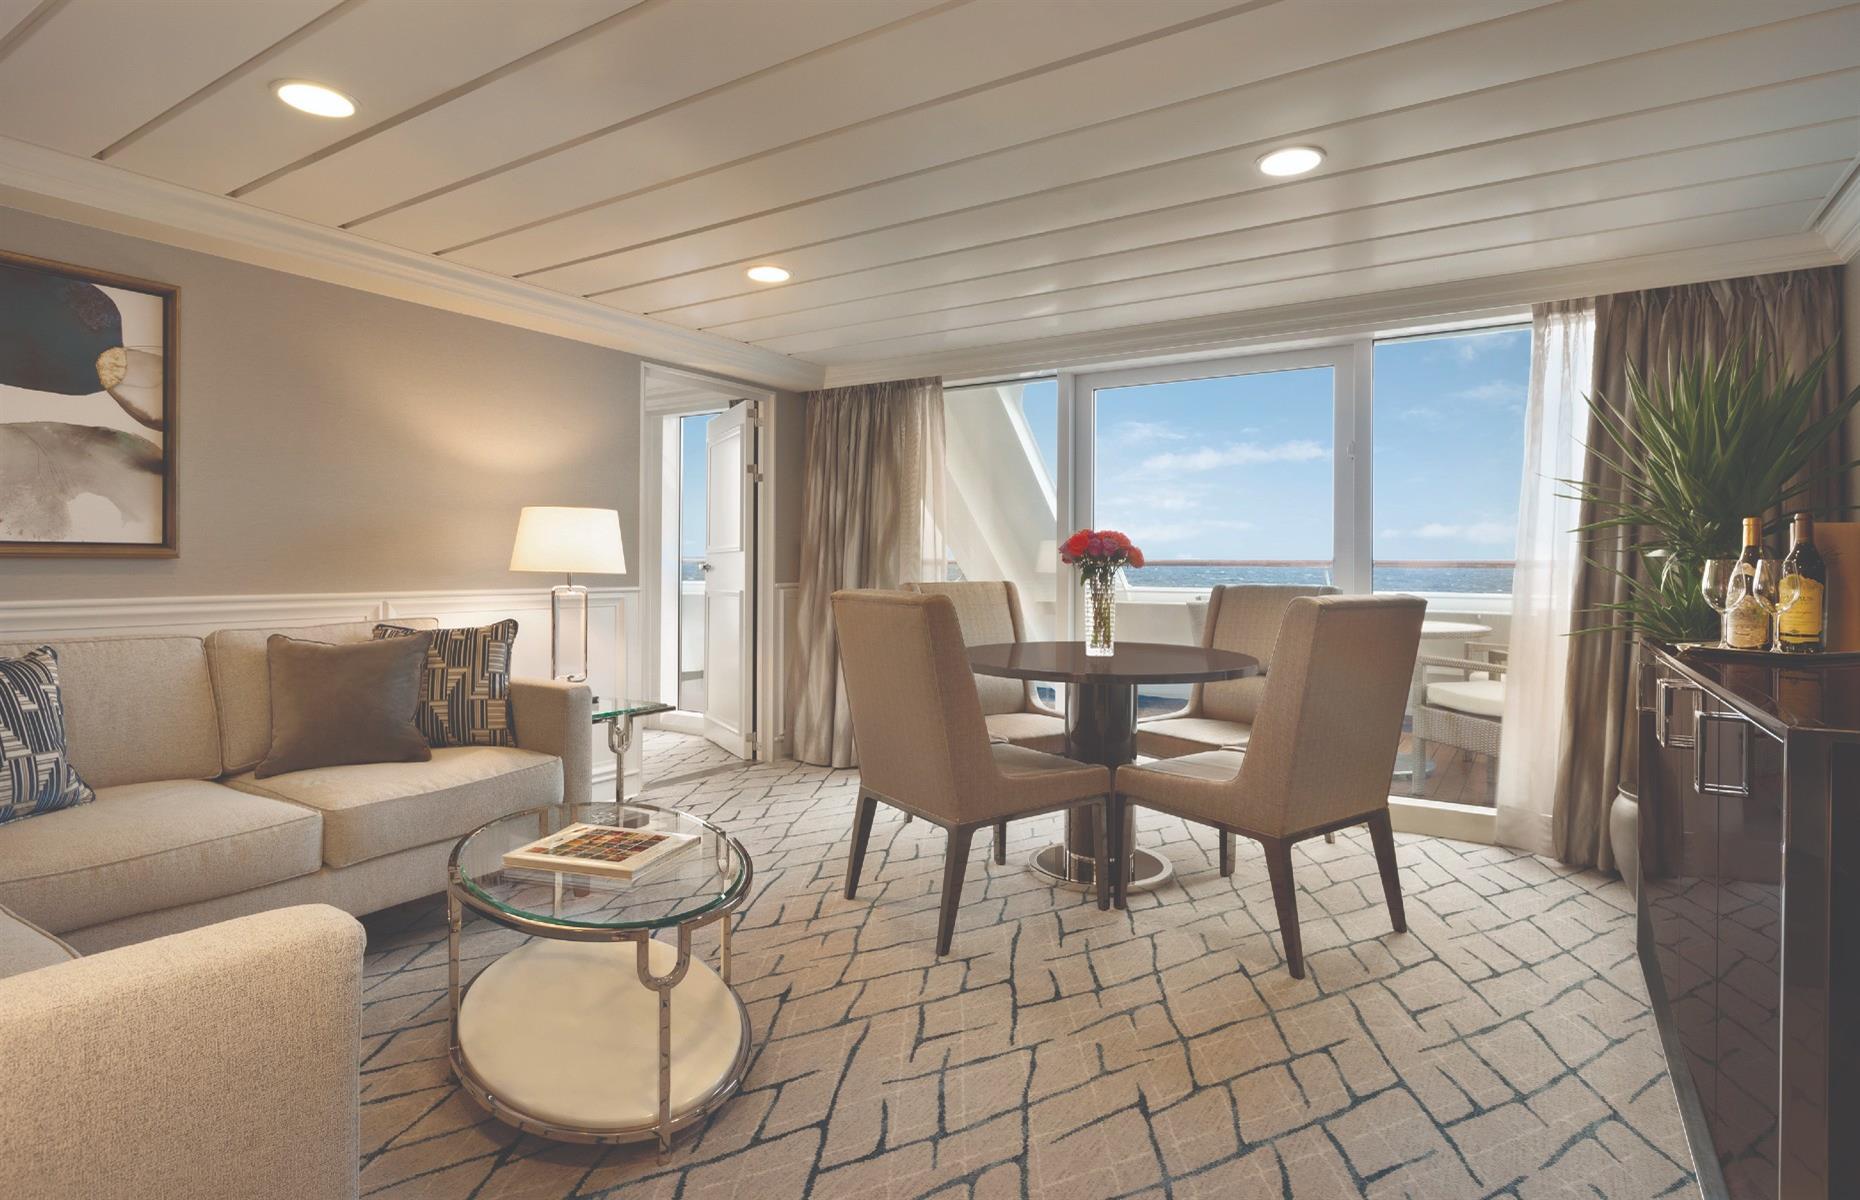 <p><a href="https://www.oceaniacruises.com/ships/regatta/">Regatta</a> is the flagship vessel of Oceania Cruises' fleet and a shining example of the OceaniaNEXT rebuild of the brand’s four 684-guest Regatta Class ships. Her 342 lavish suites and staterooms showcase designer furnishings, while the reimagined public spaces feature Tuscan marble, a revamped color palette of soft sea and sky tones, works of art and a tasteful renewal of fabrics, furnishings and light fixtures.</p>